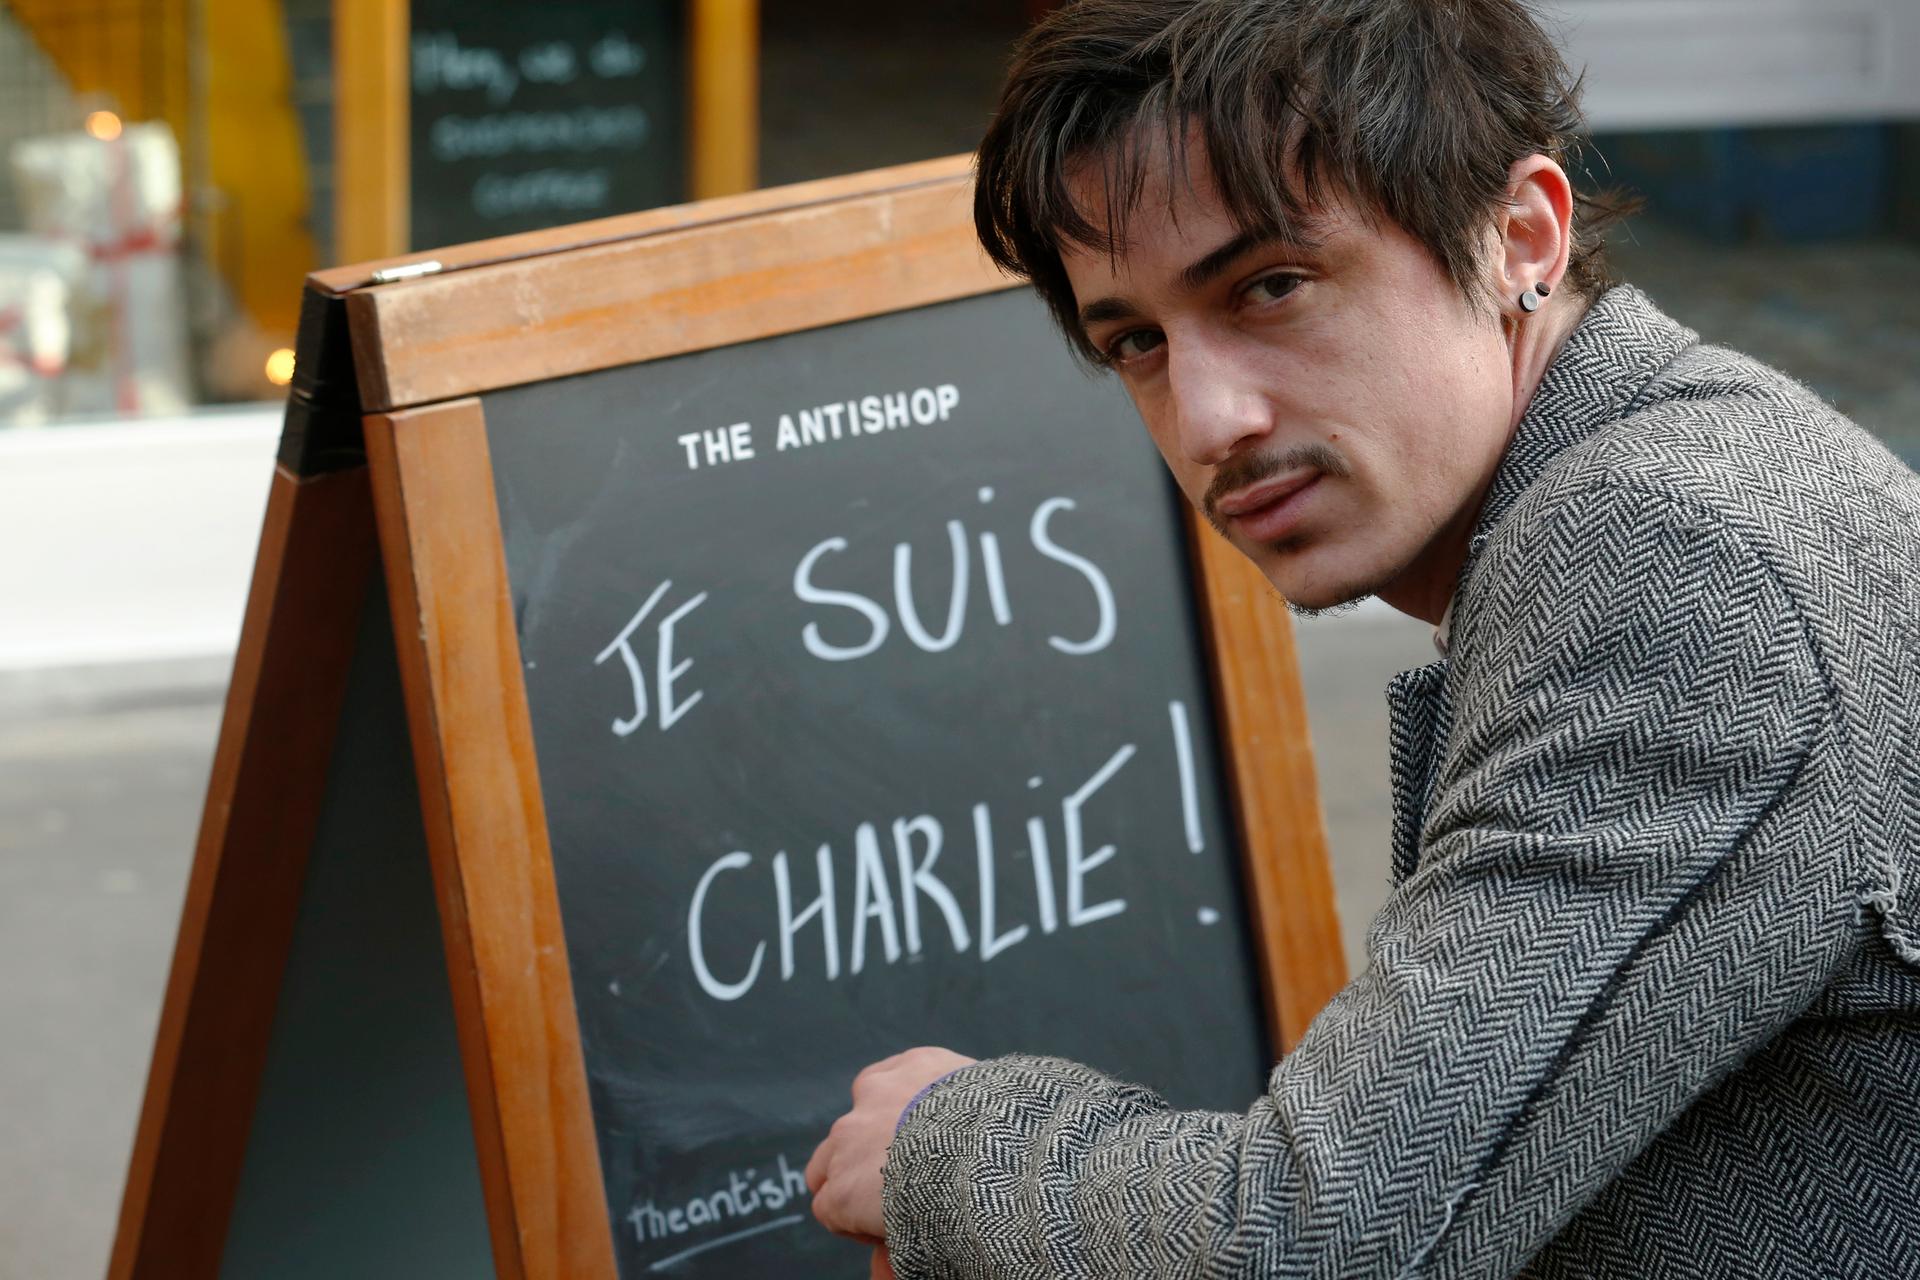 Adel Defilaux, a French-born Muslim, poses Wednesday outside his cafe in east London. Defilaux has received death threats for displaying the sign.